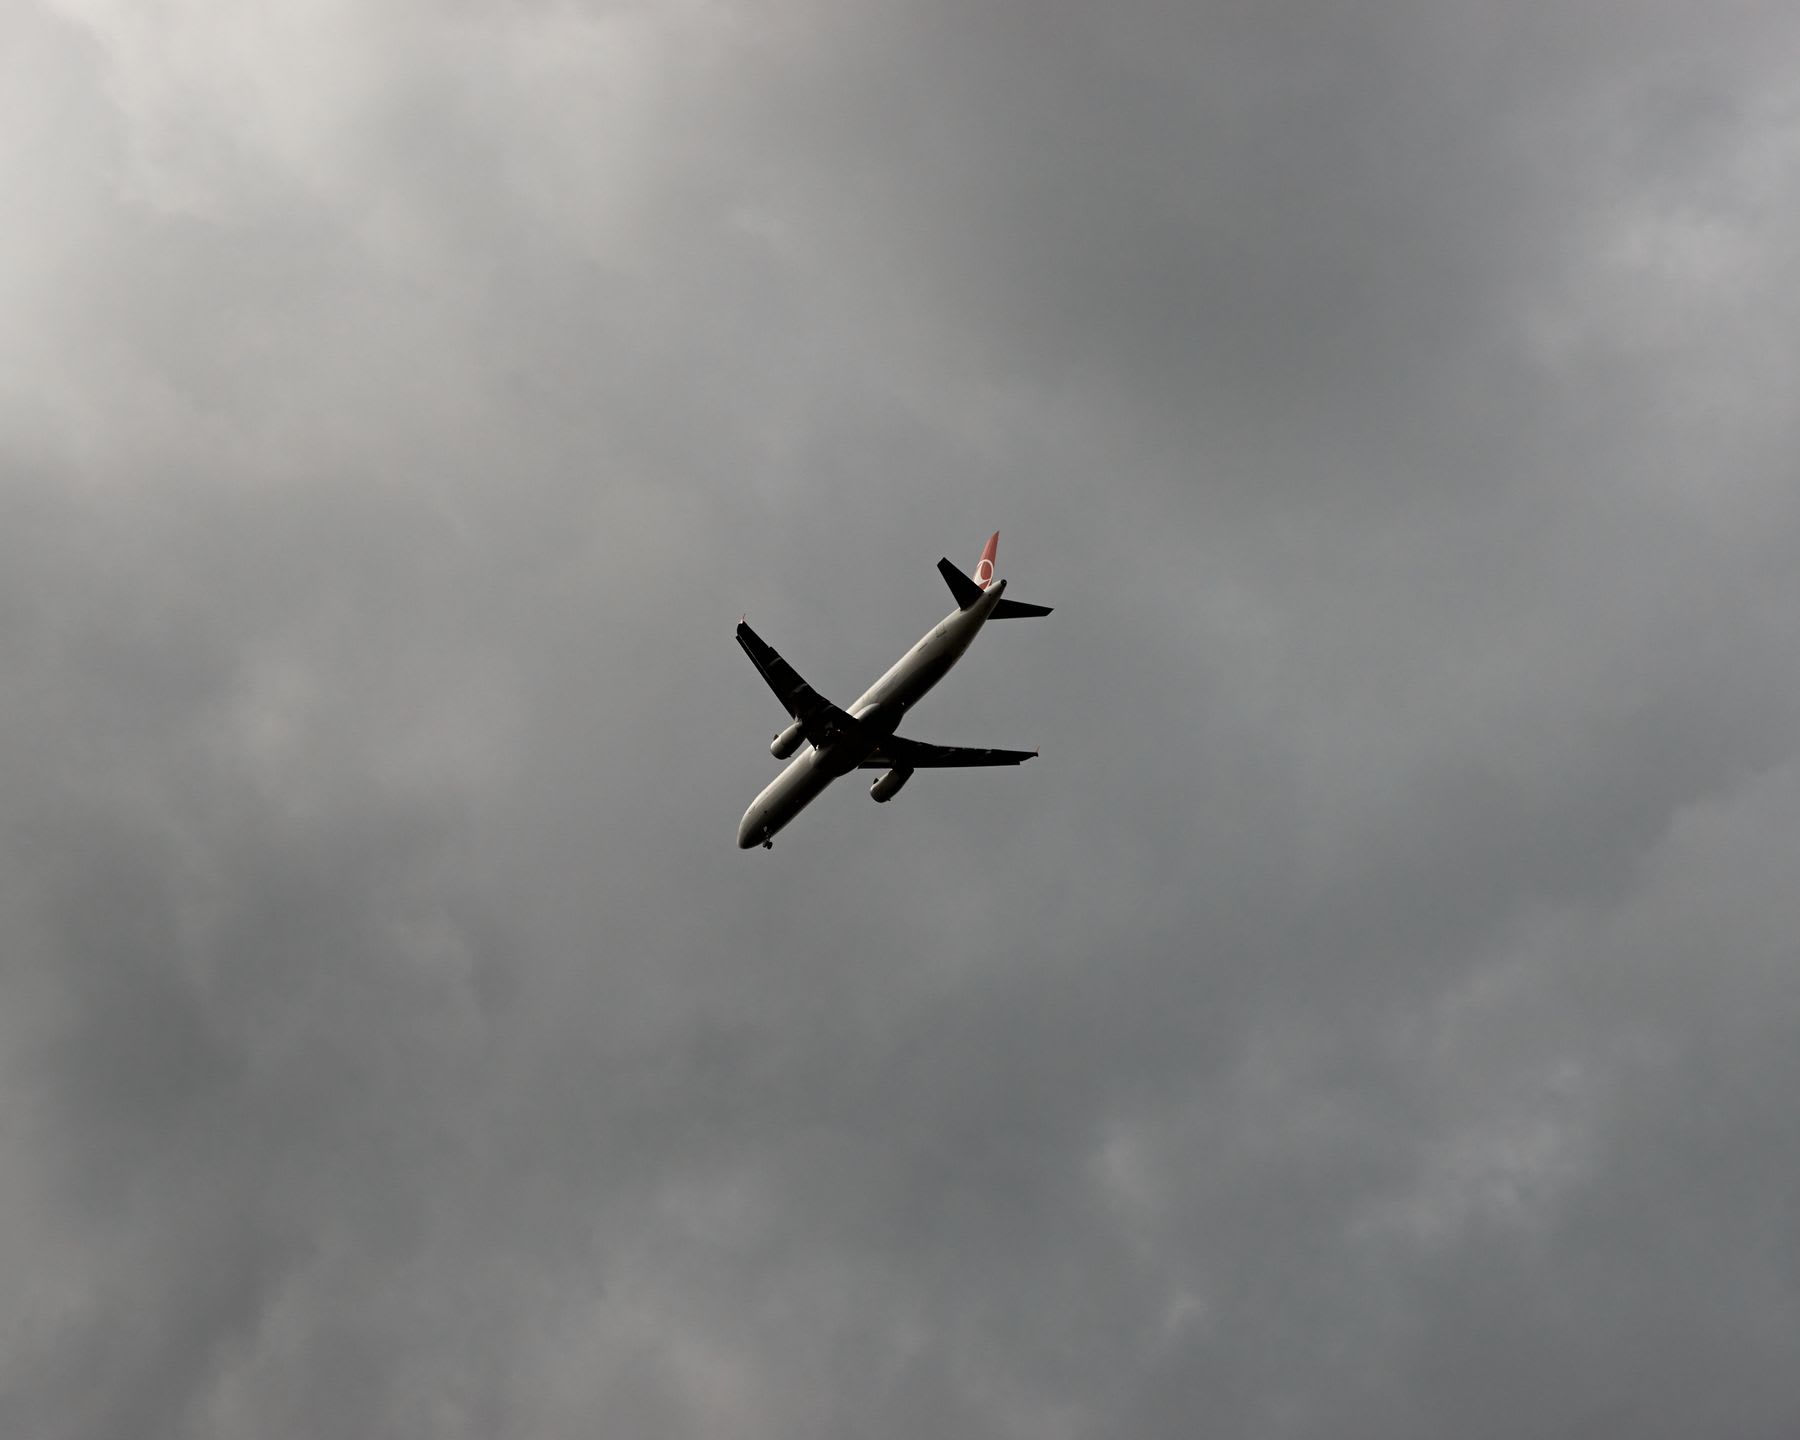 A commercial airliner flies high above in the sky on a cloudy and gray day.